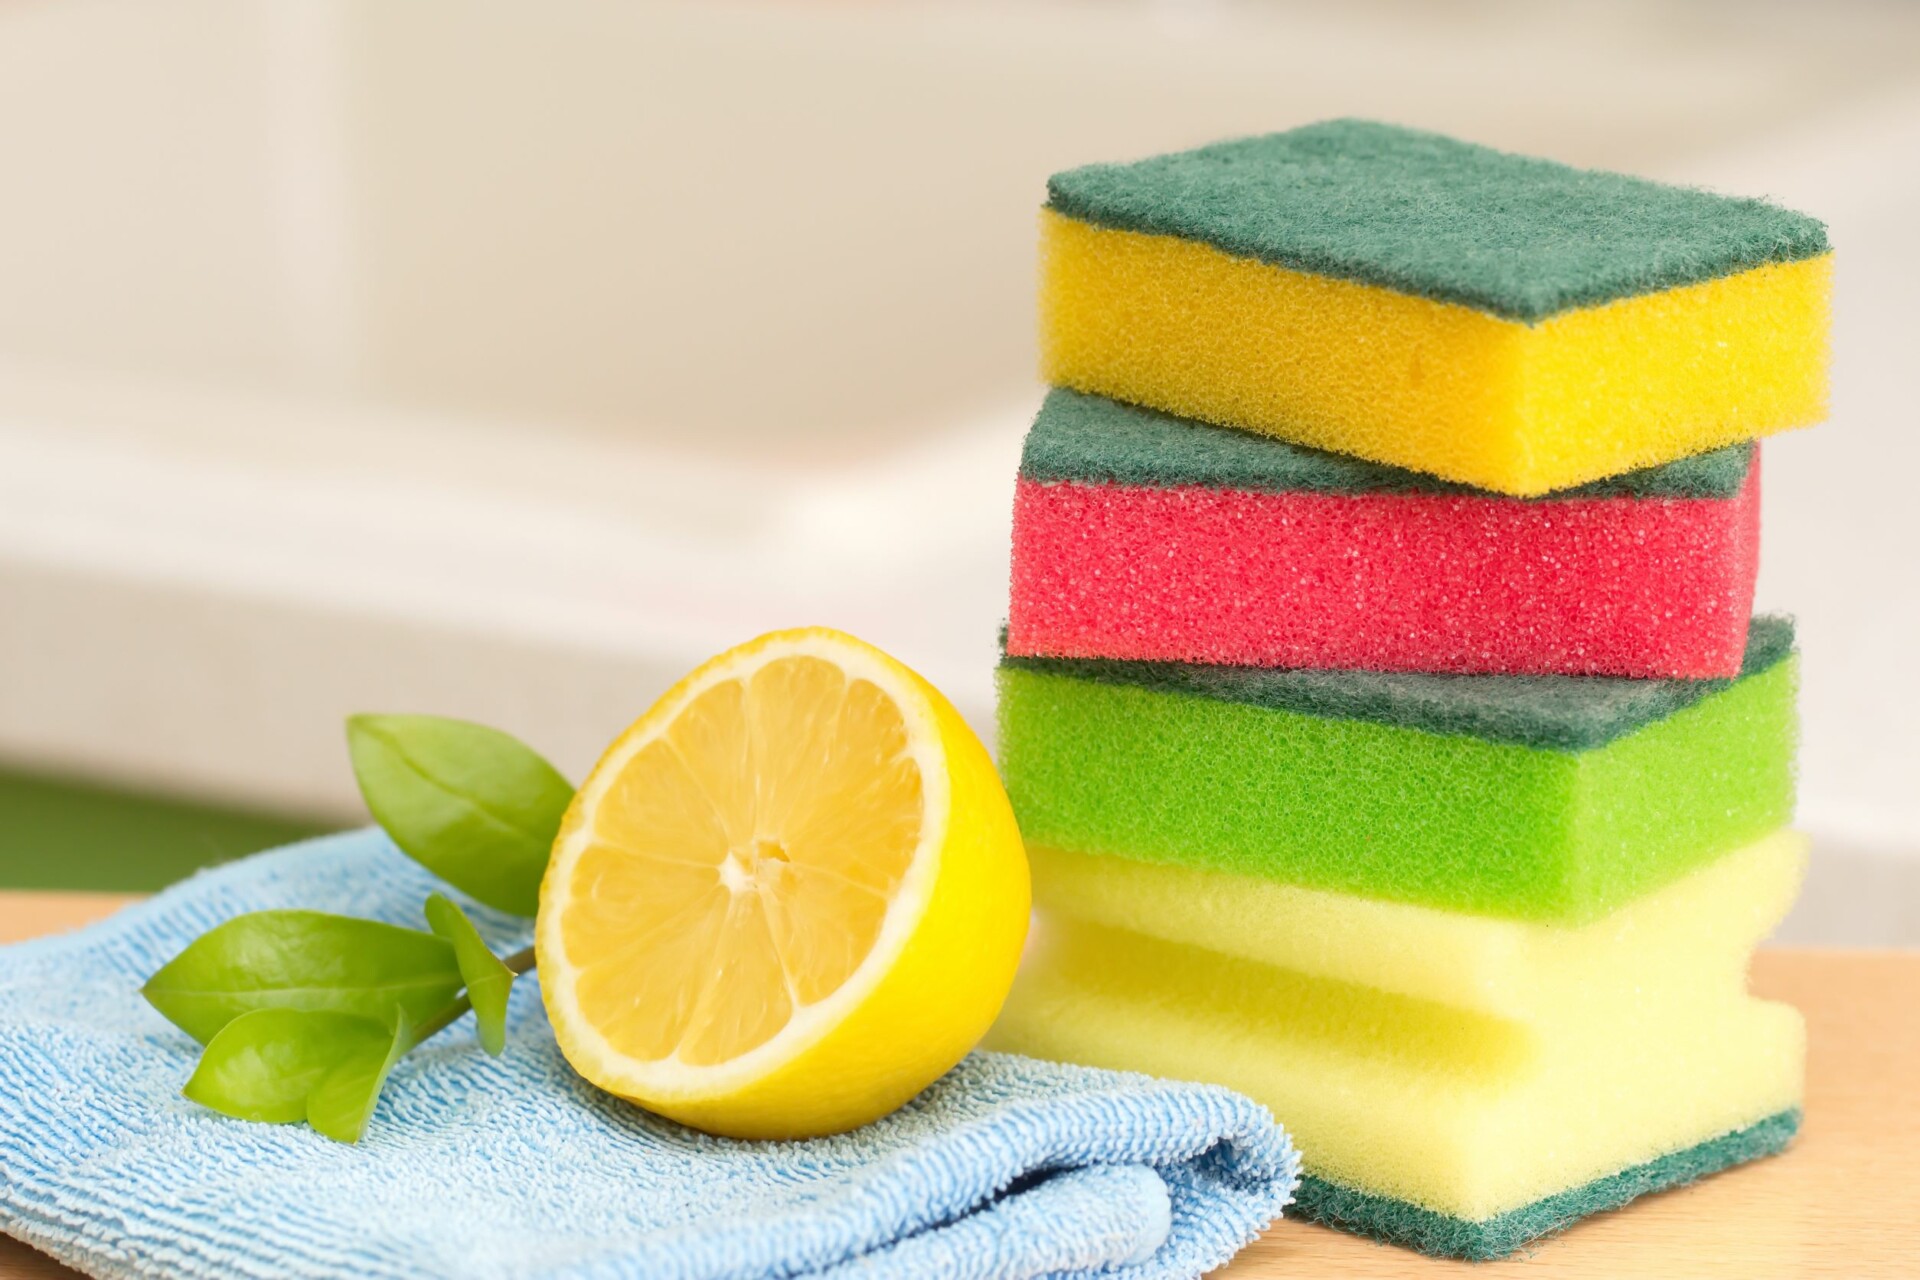 Are Kitchen Sponges Bad for the Environment